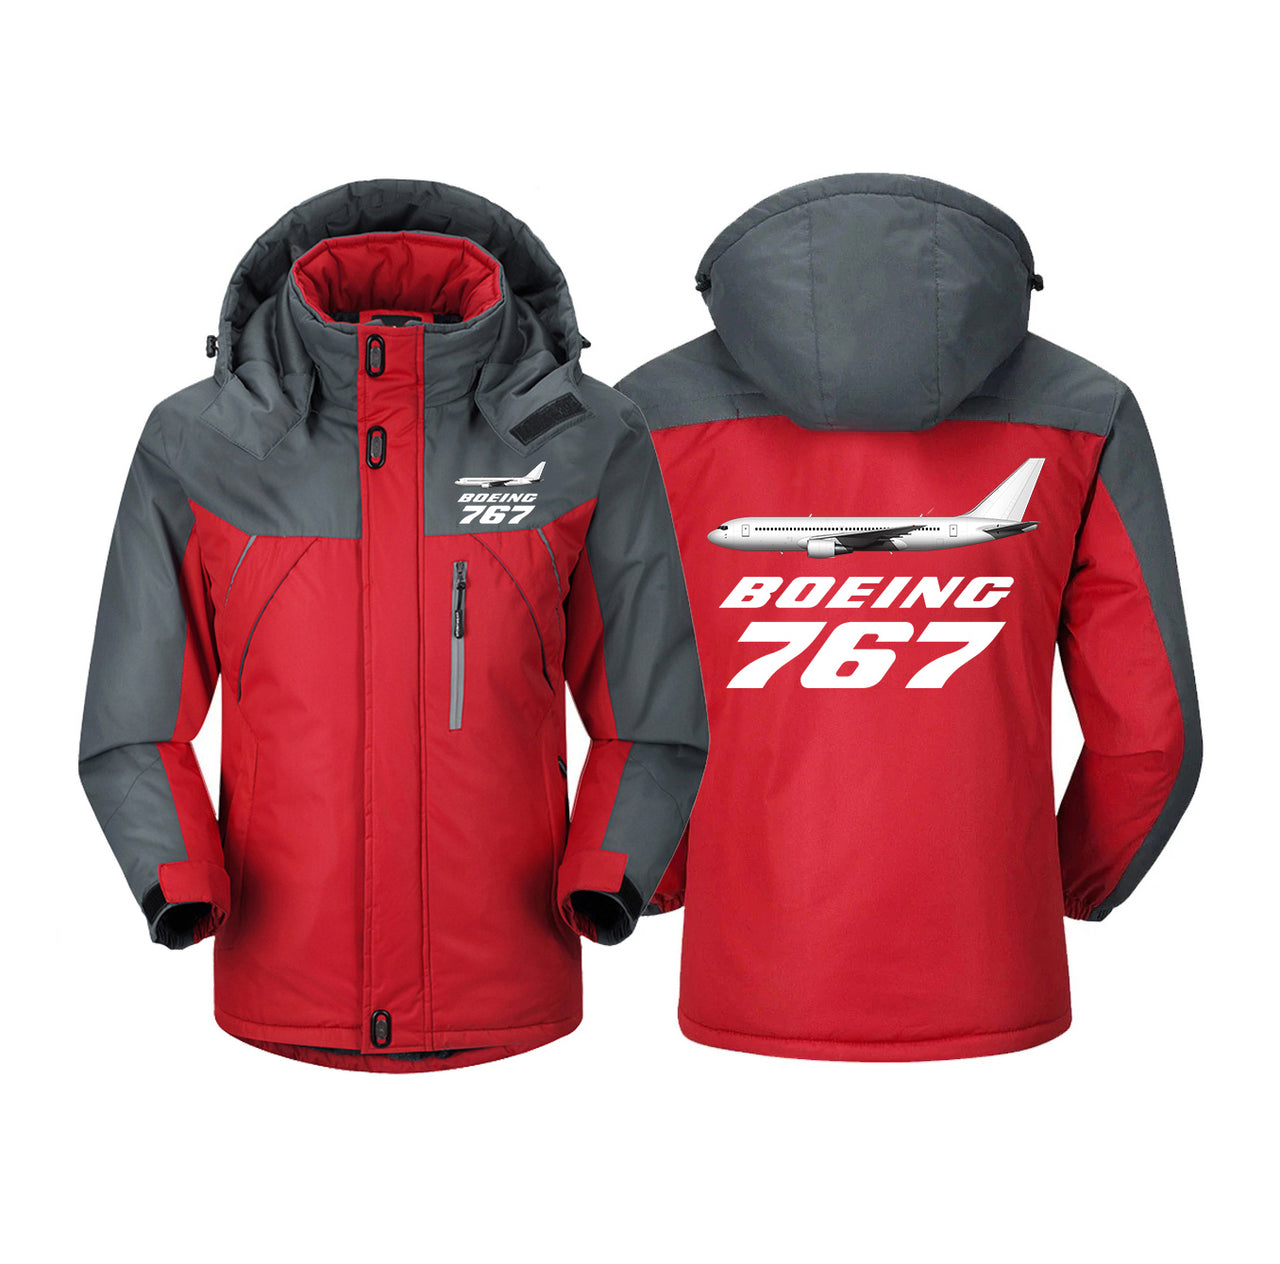 The Boeing 767 Designed Thick Winter Jackets